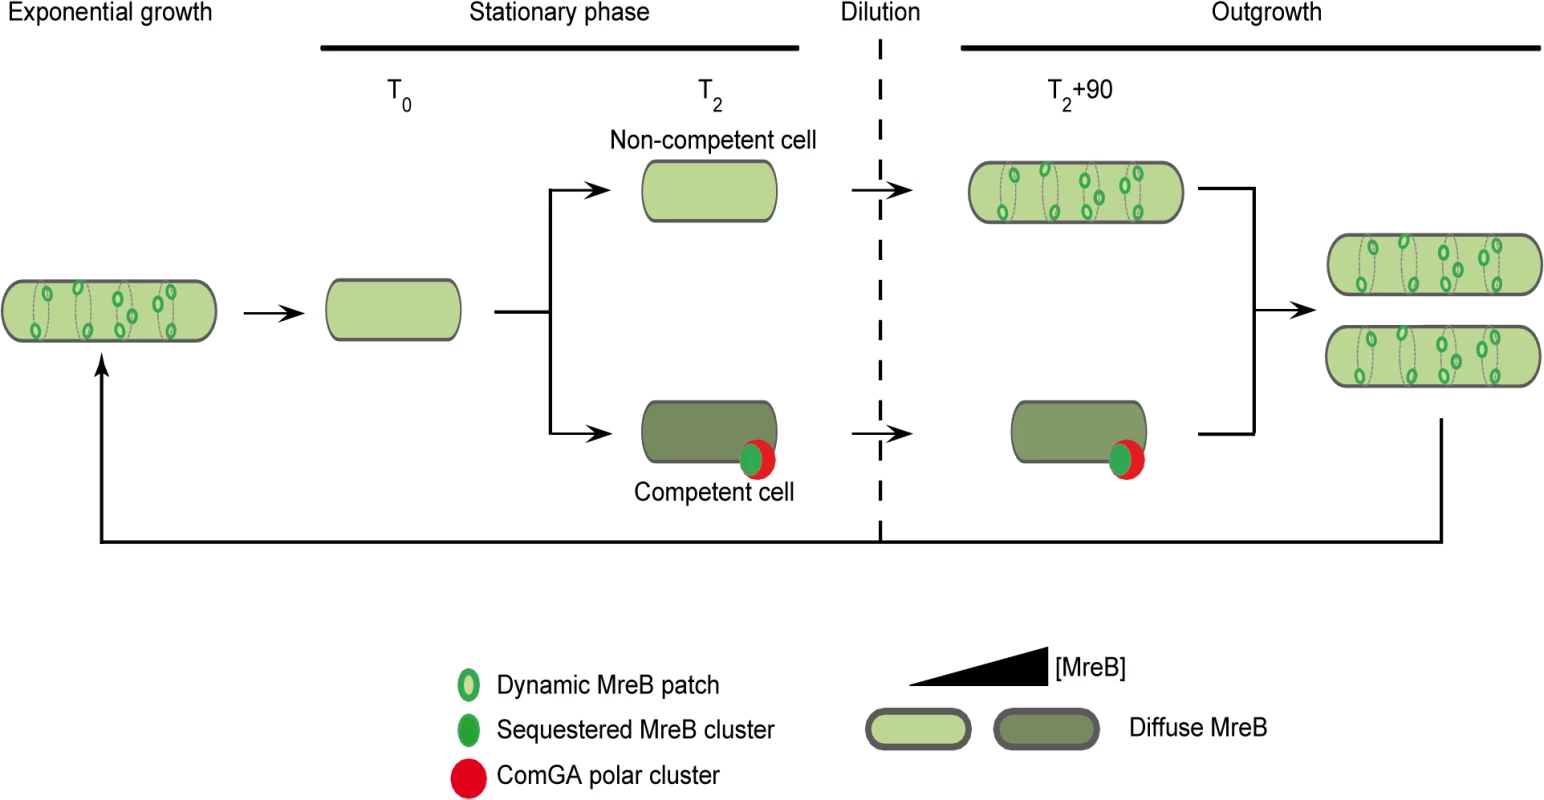 A model for sequestration of MreB by ComGA to prevent cell elongation and delay the escape from competence.